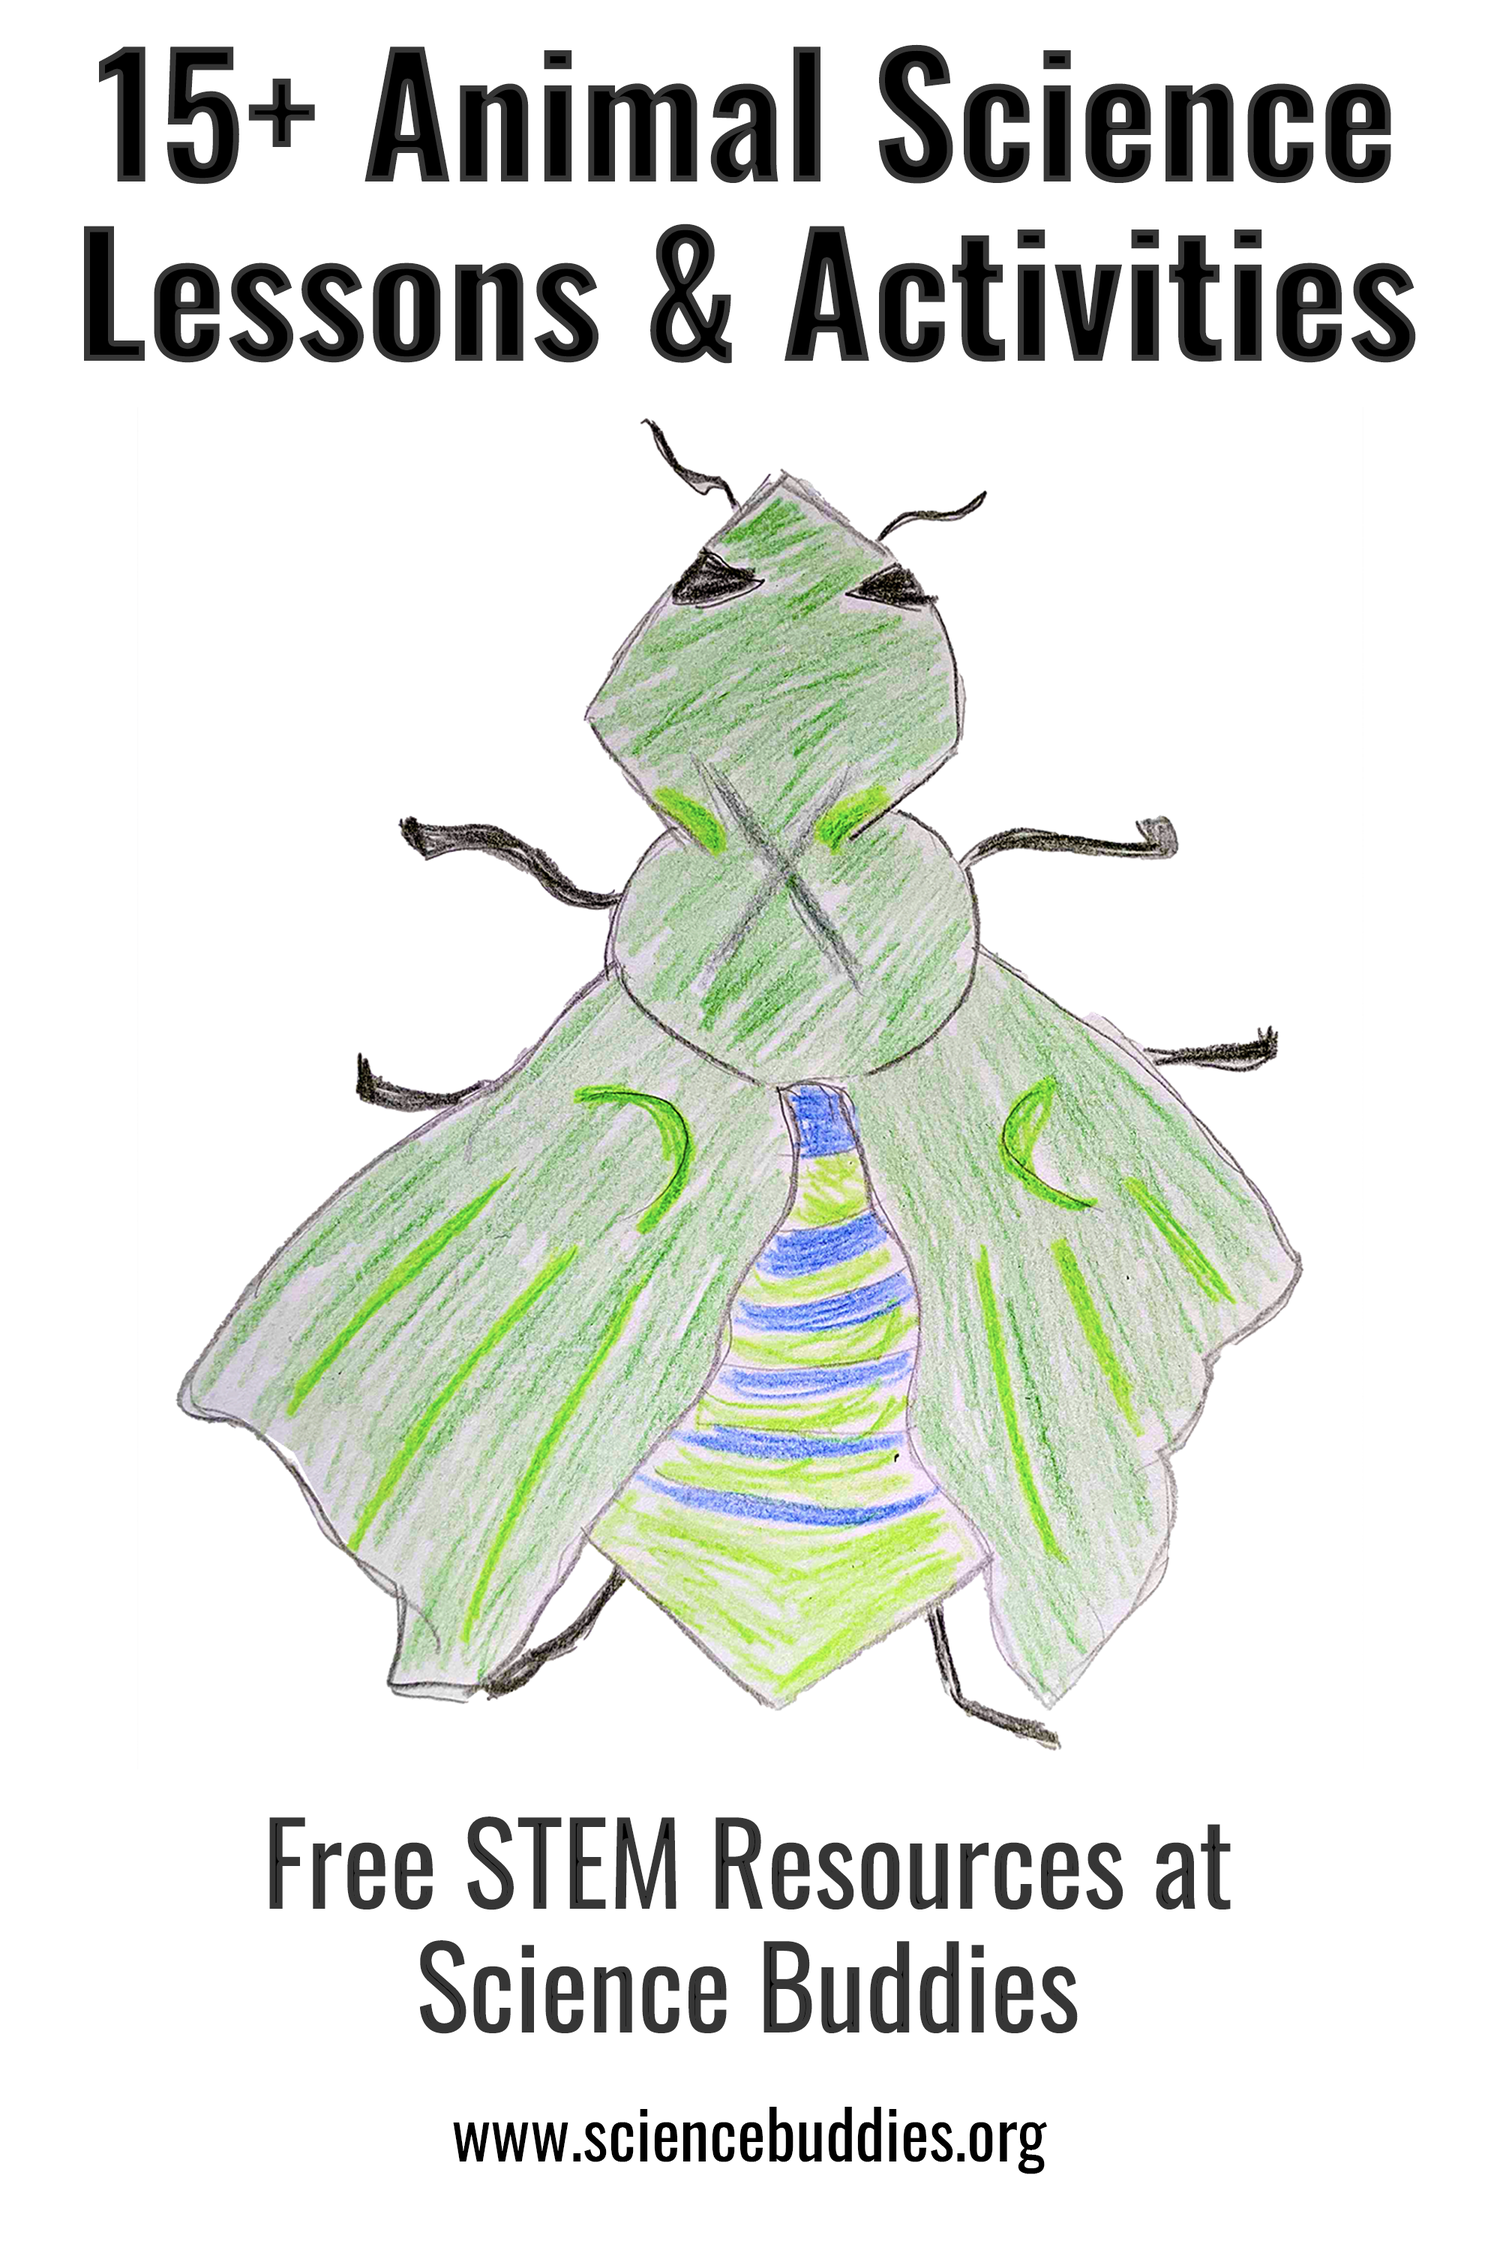 Hand-drawn and colored insect from invent an insect lesson on animal science